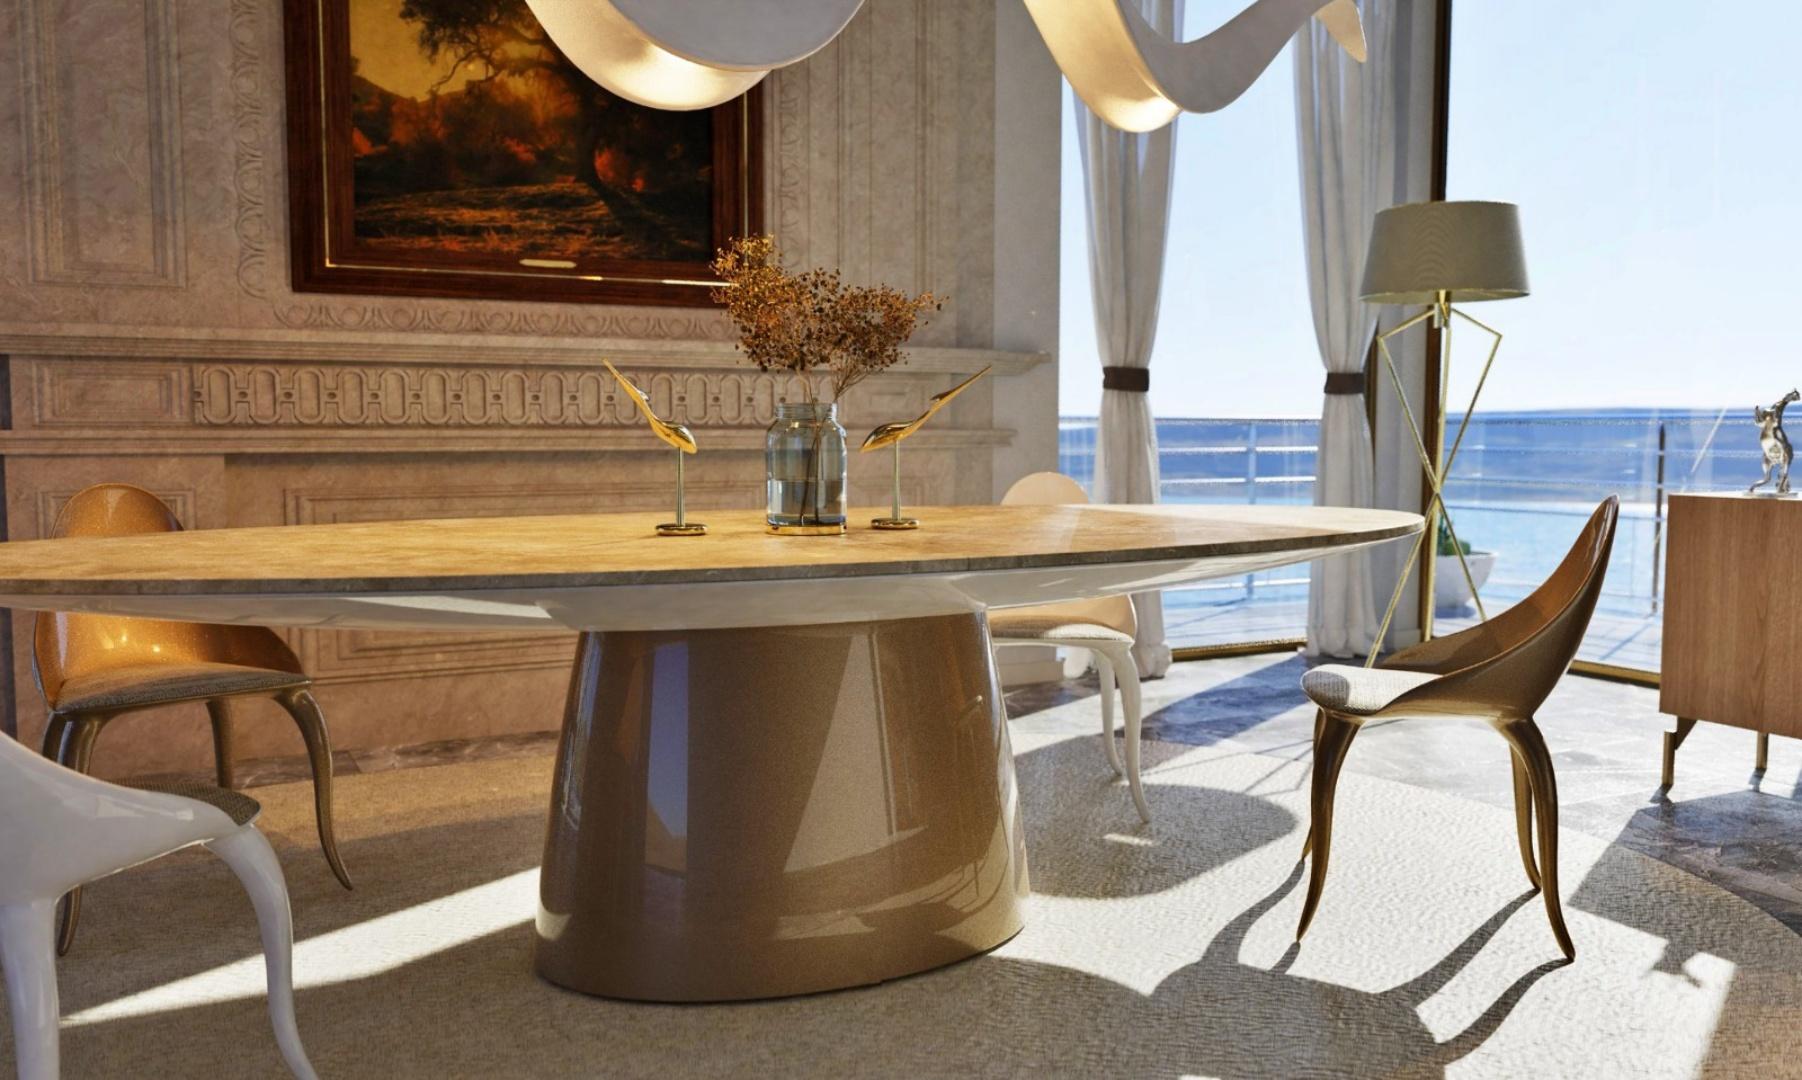 Dining table

General information

Dimensions (cm): 300 x 130 x 75
Dimensions (in): 118.1 x 51.2 x 29.5
Seats: 8 to 10

Materials and colors

Top: Resin reinforced with fiberglass lacquered in high gloss white and Fior di bosco marble;
Finish: Resin